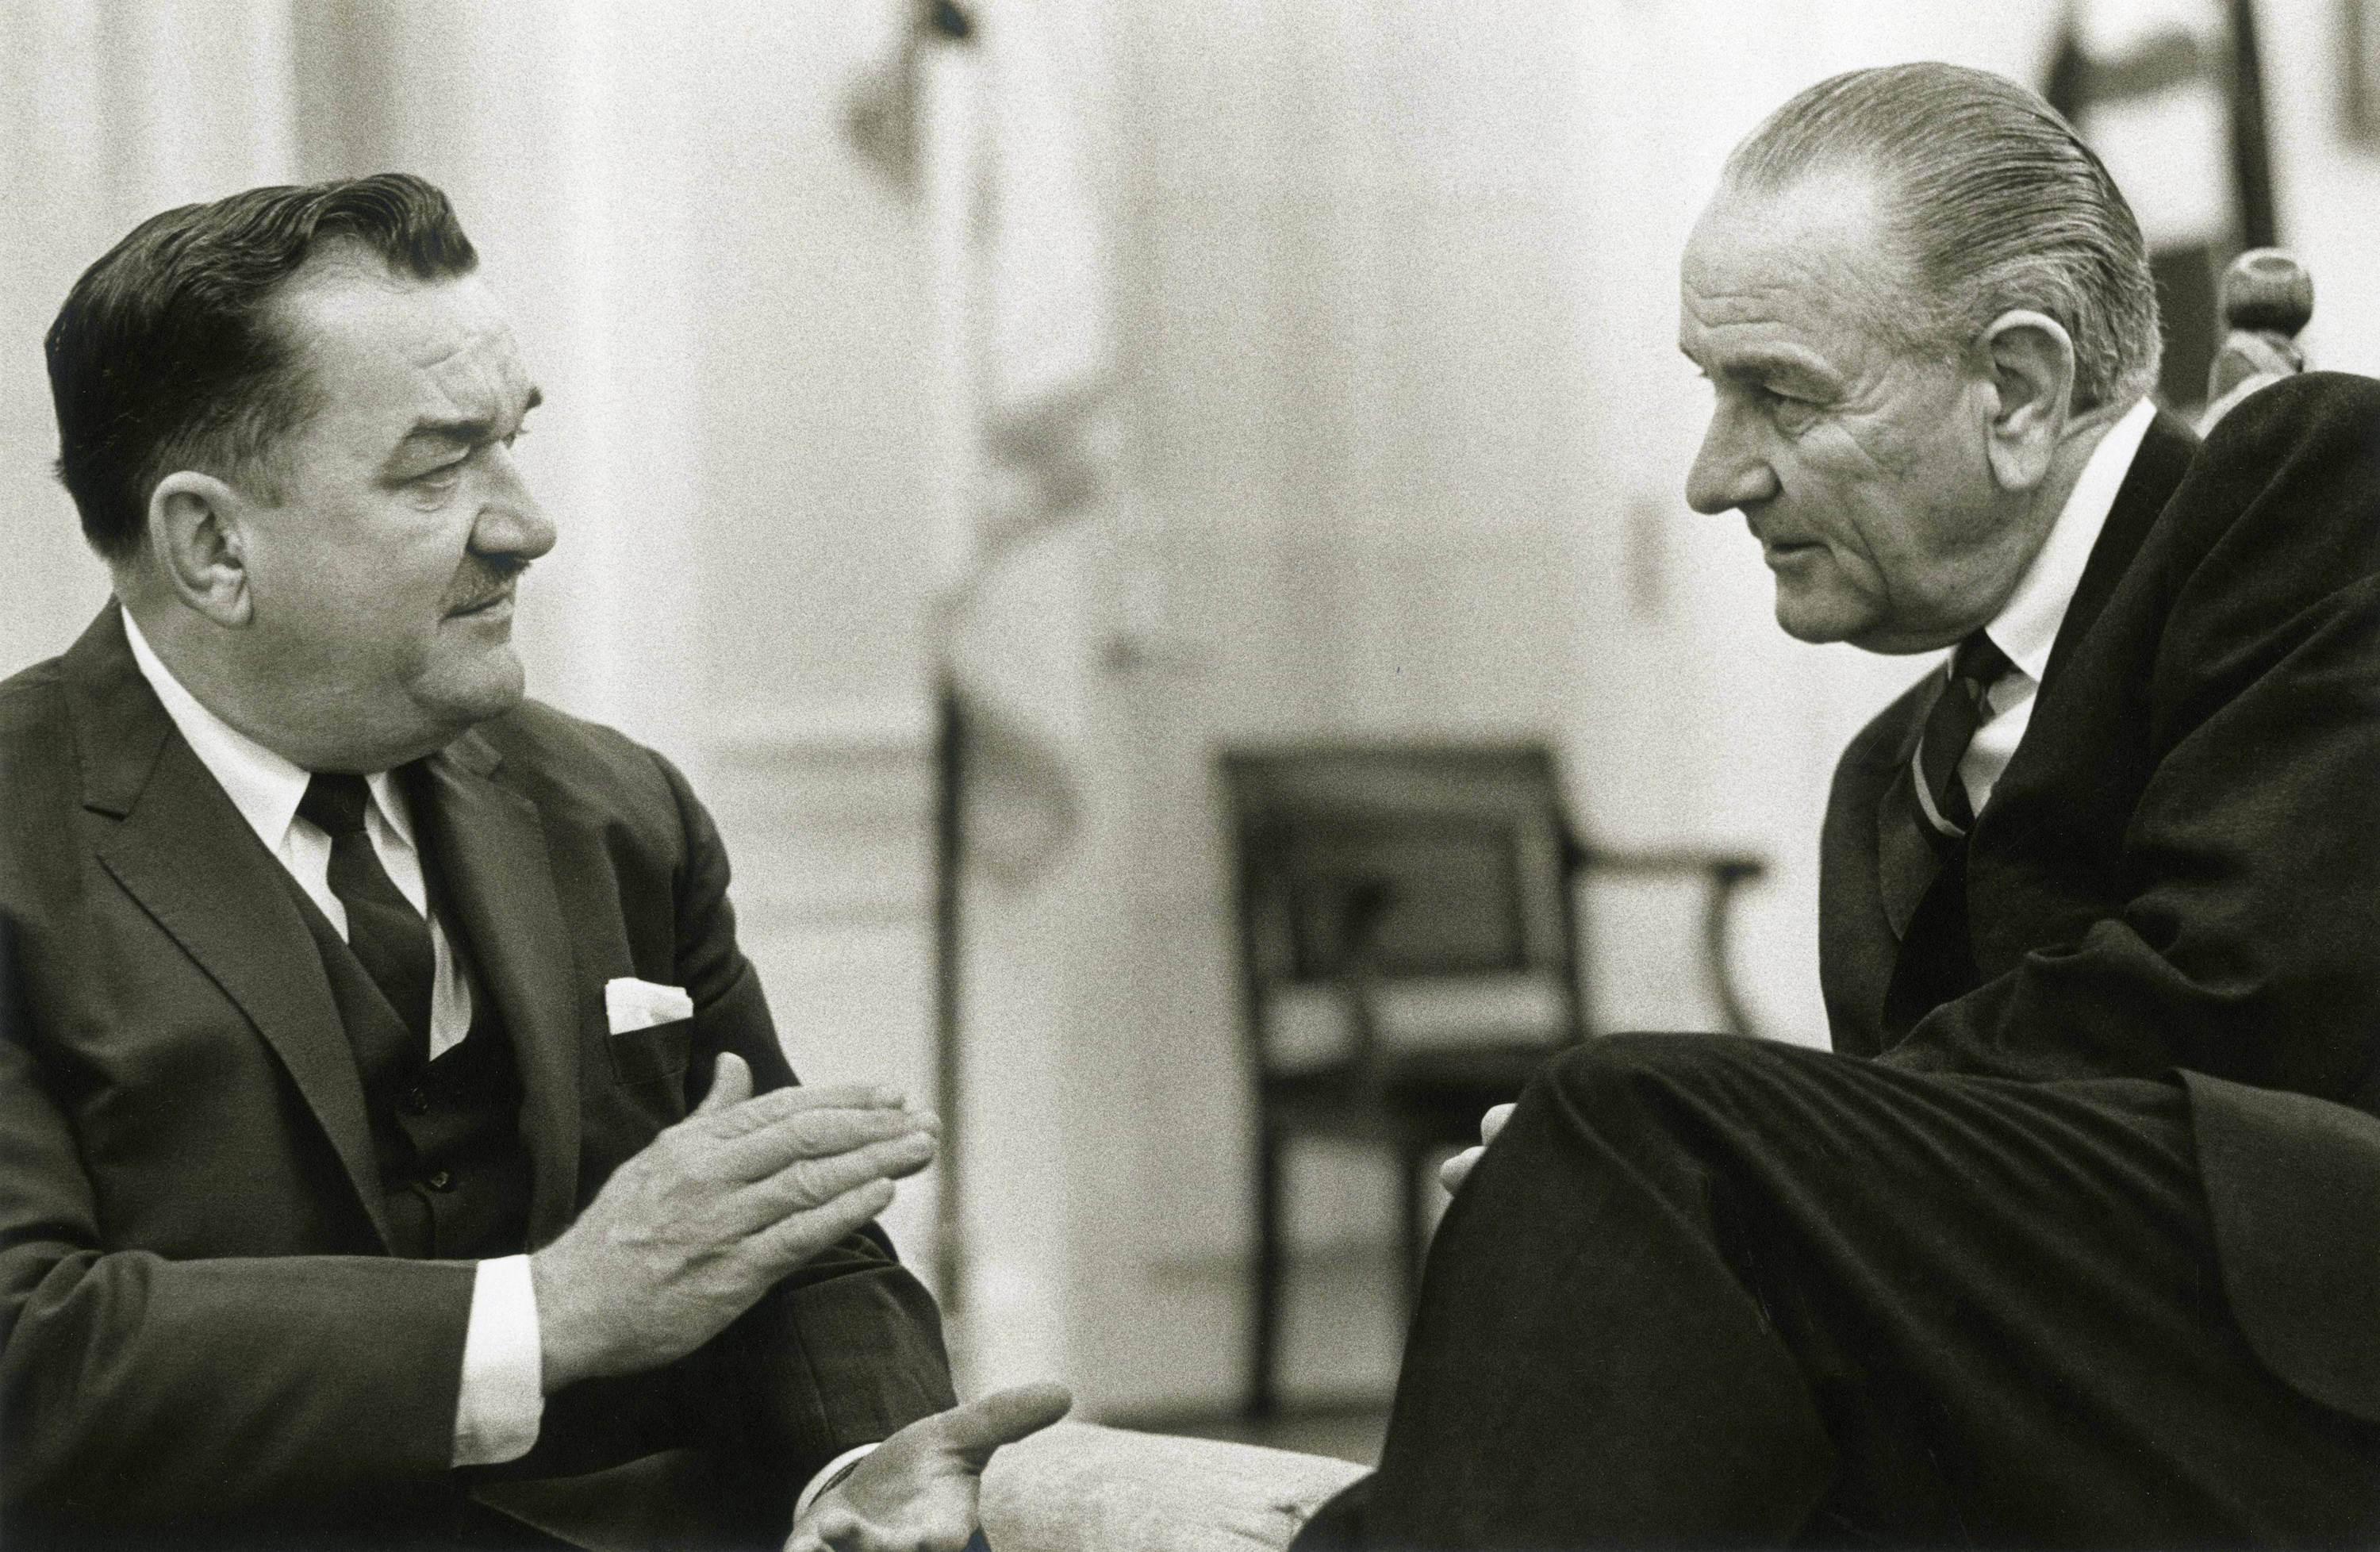 Representative Zablocki speaks with President Lyndon B. Johnson at the White House in this photograph from April 1968. 